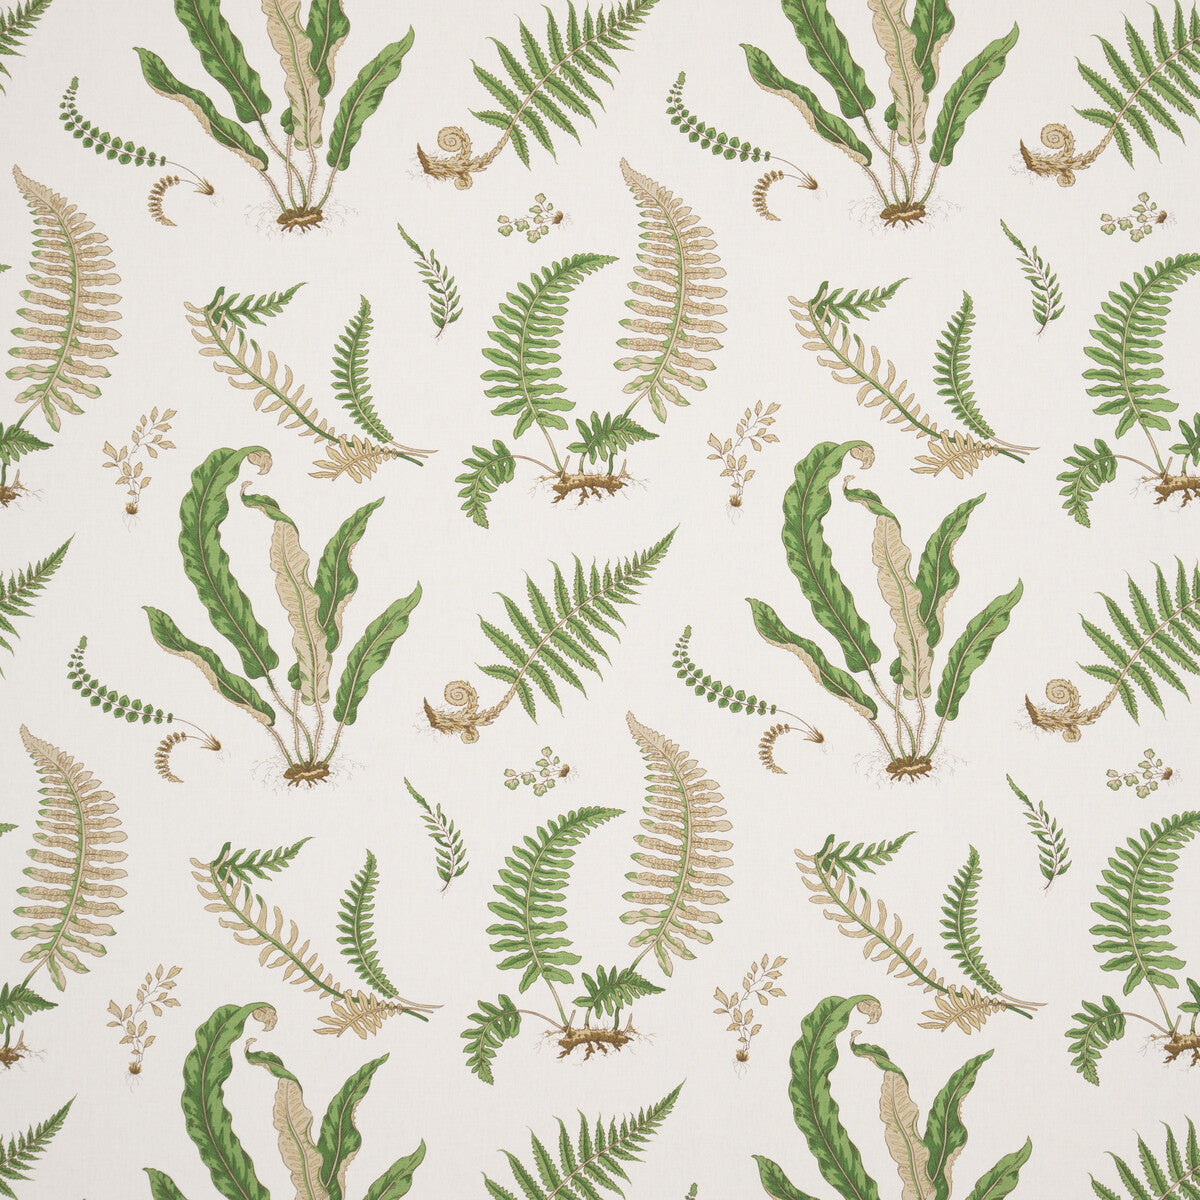 Ferns Linen fabric in stone/green color - pattern R1324.01.0 - by G P &amp; J Baker in the Perennia collection